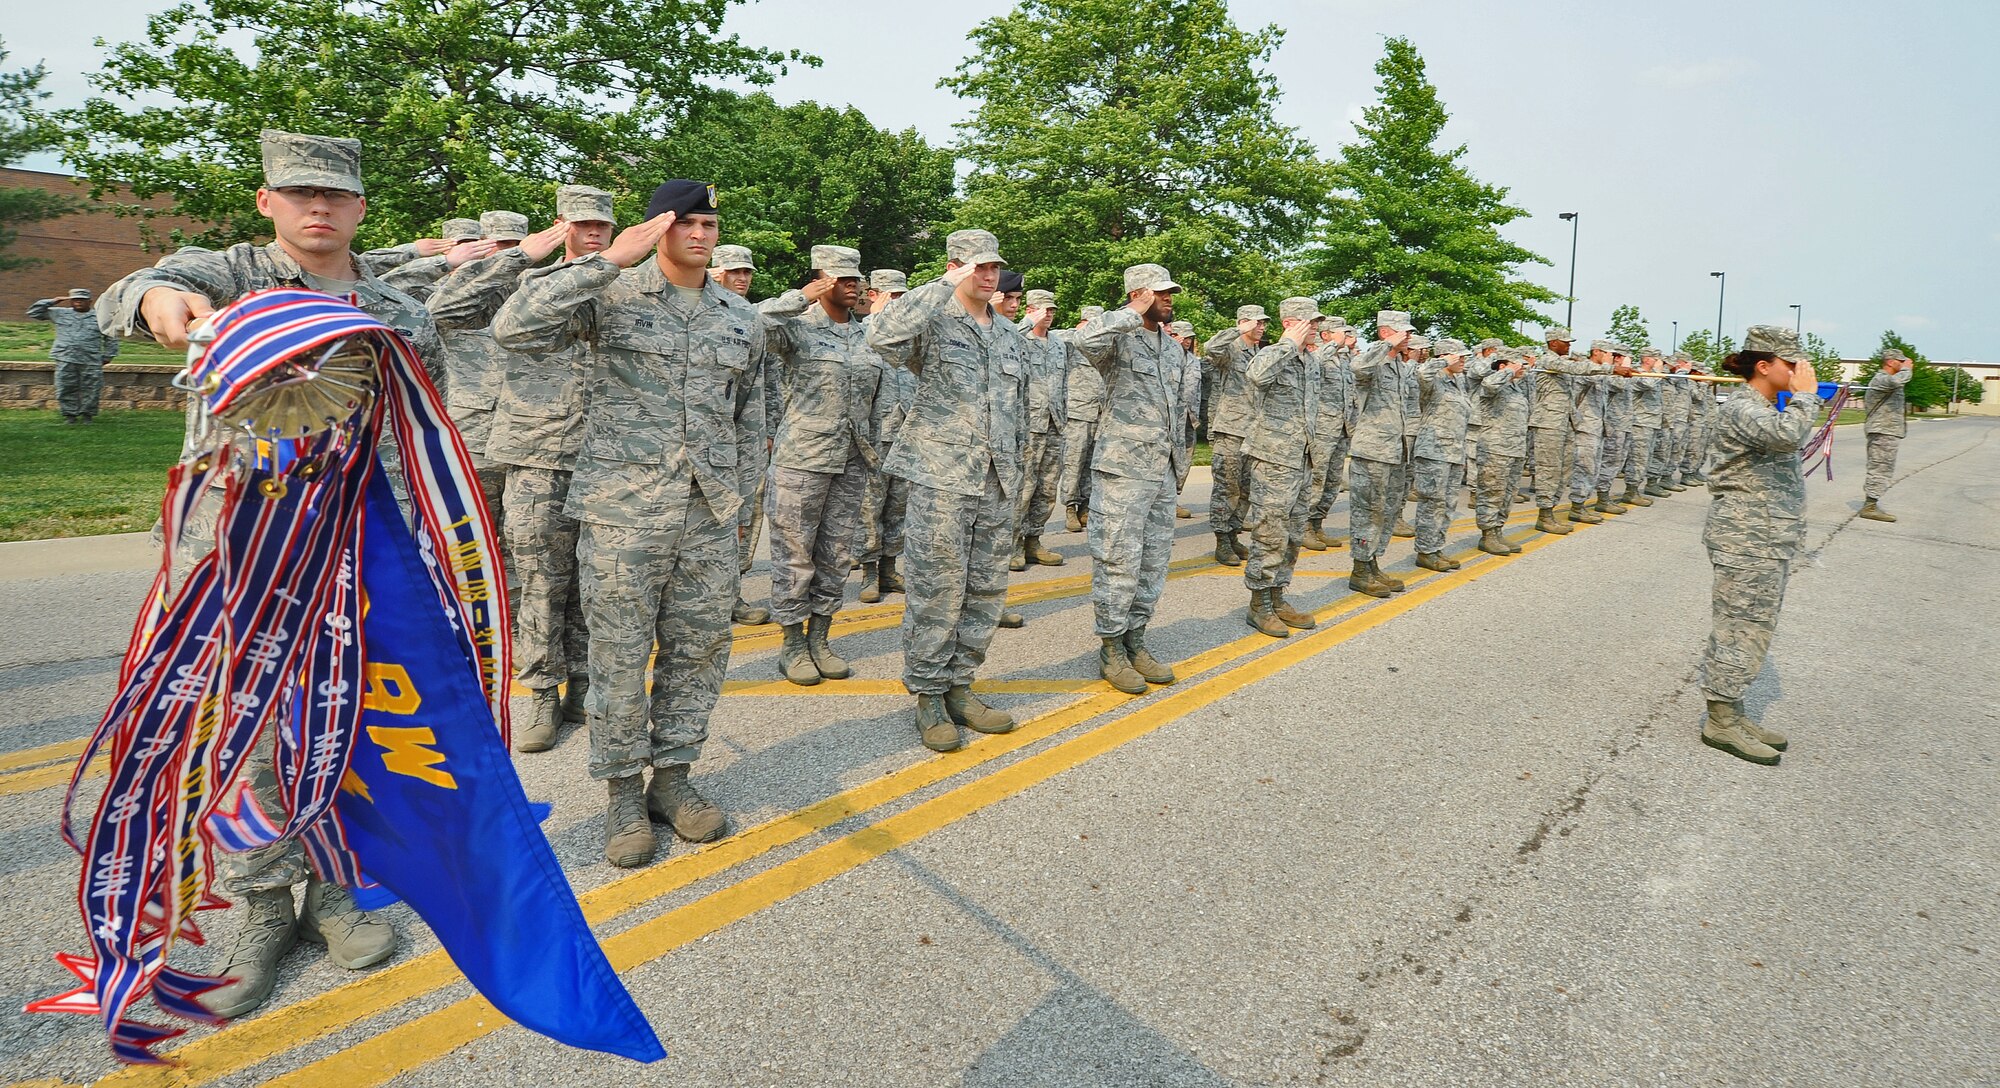 WHITEMAN AIR FORCE BASE, Mo. -- Airmen from the 509th Bomb Wing salute during the playing of the national anthem at a Wing Retreat Ceremony in honor of Memorial Day May 24, 2012. Memorial Day is a day of remembrance for those who died serving in the United States Armed Forces. (U.S. Air Force photo/Senior Airman Nick Wilson) (Released)